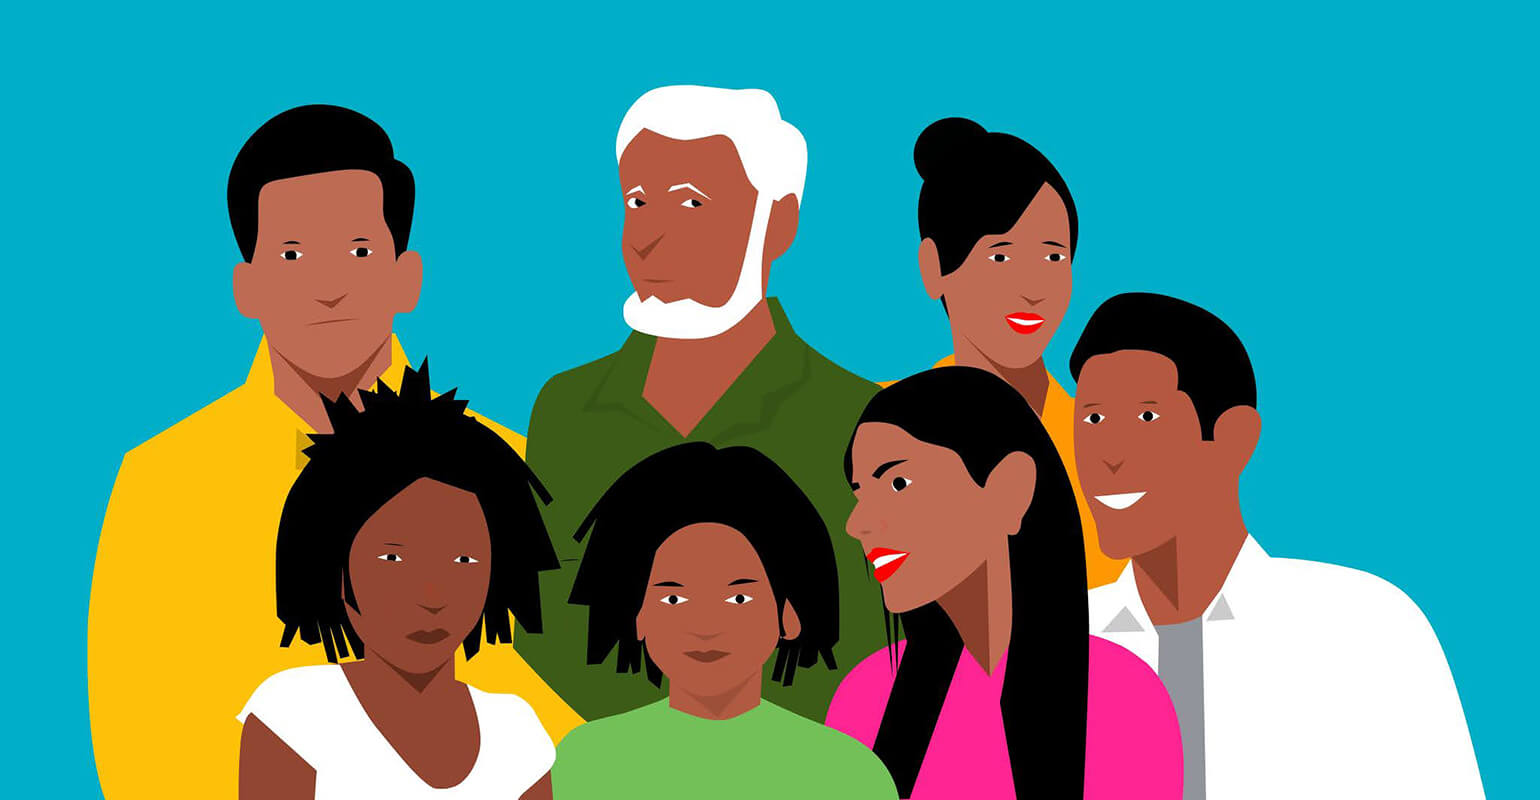 A cartoon of a group of individuals, all BIPOC of different skin tones and ages, set against a blue background